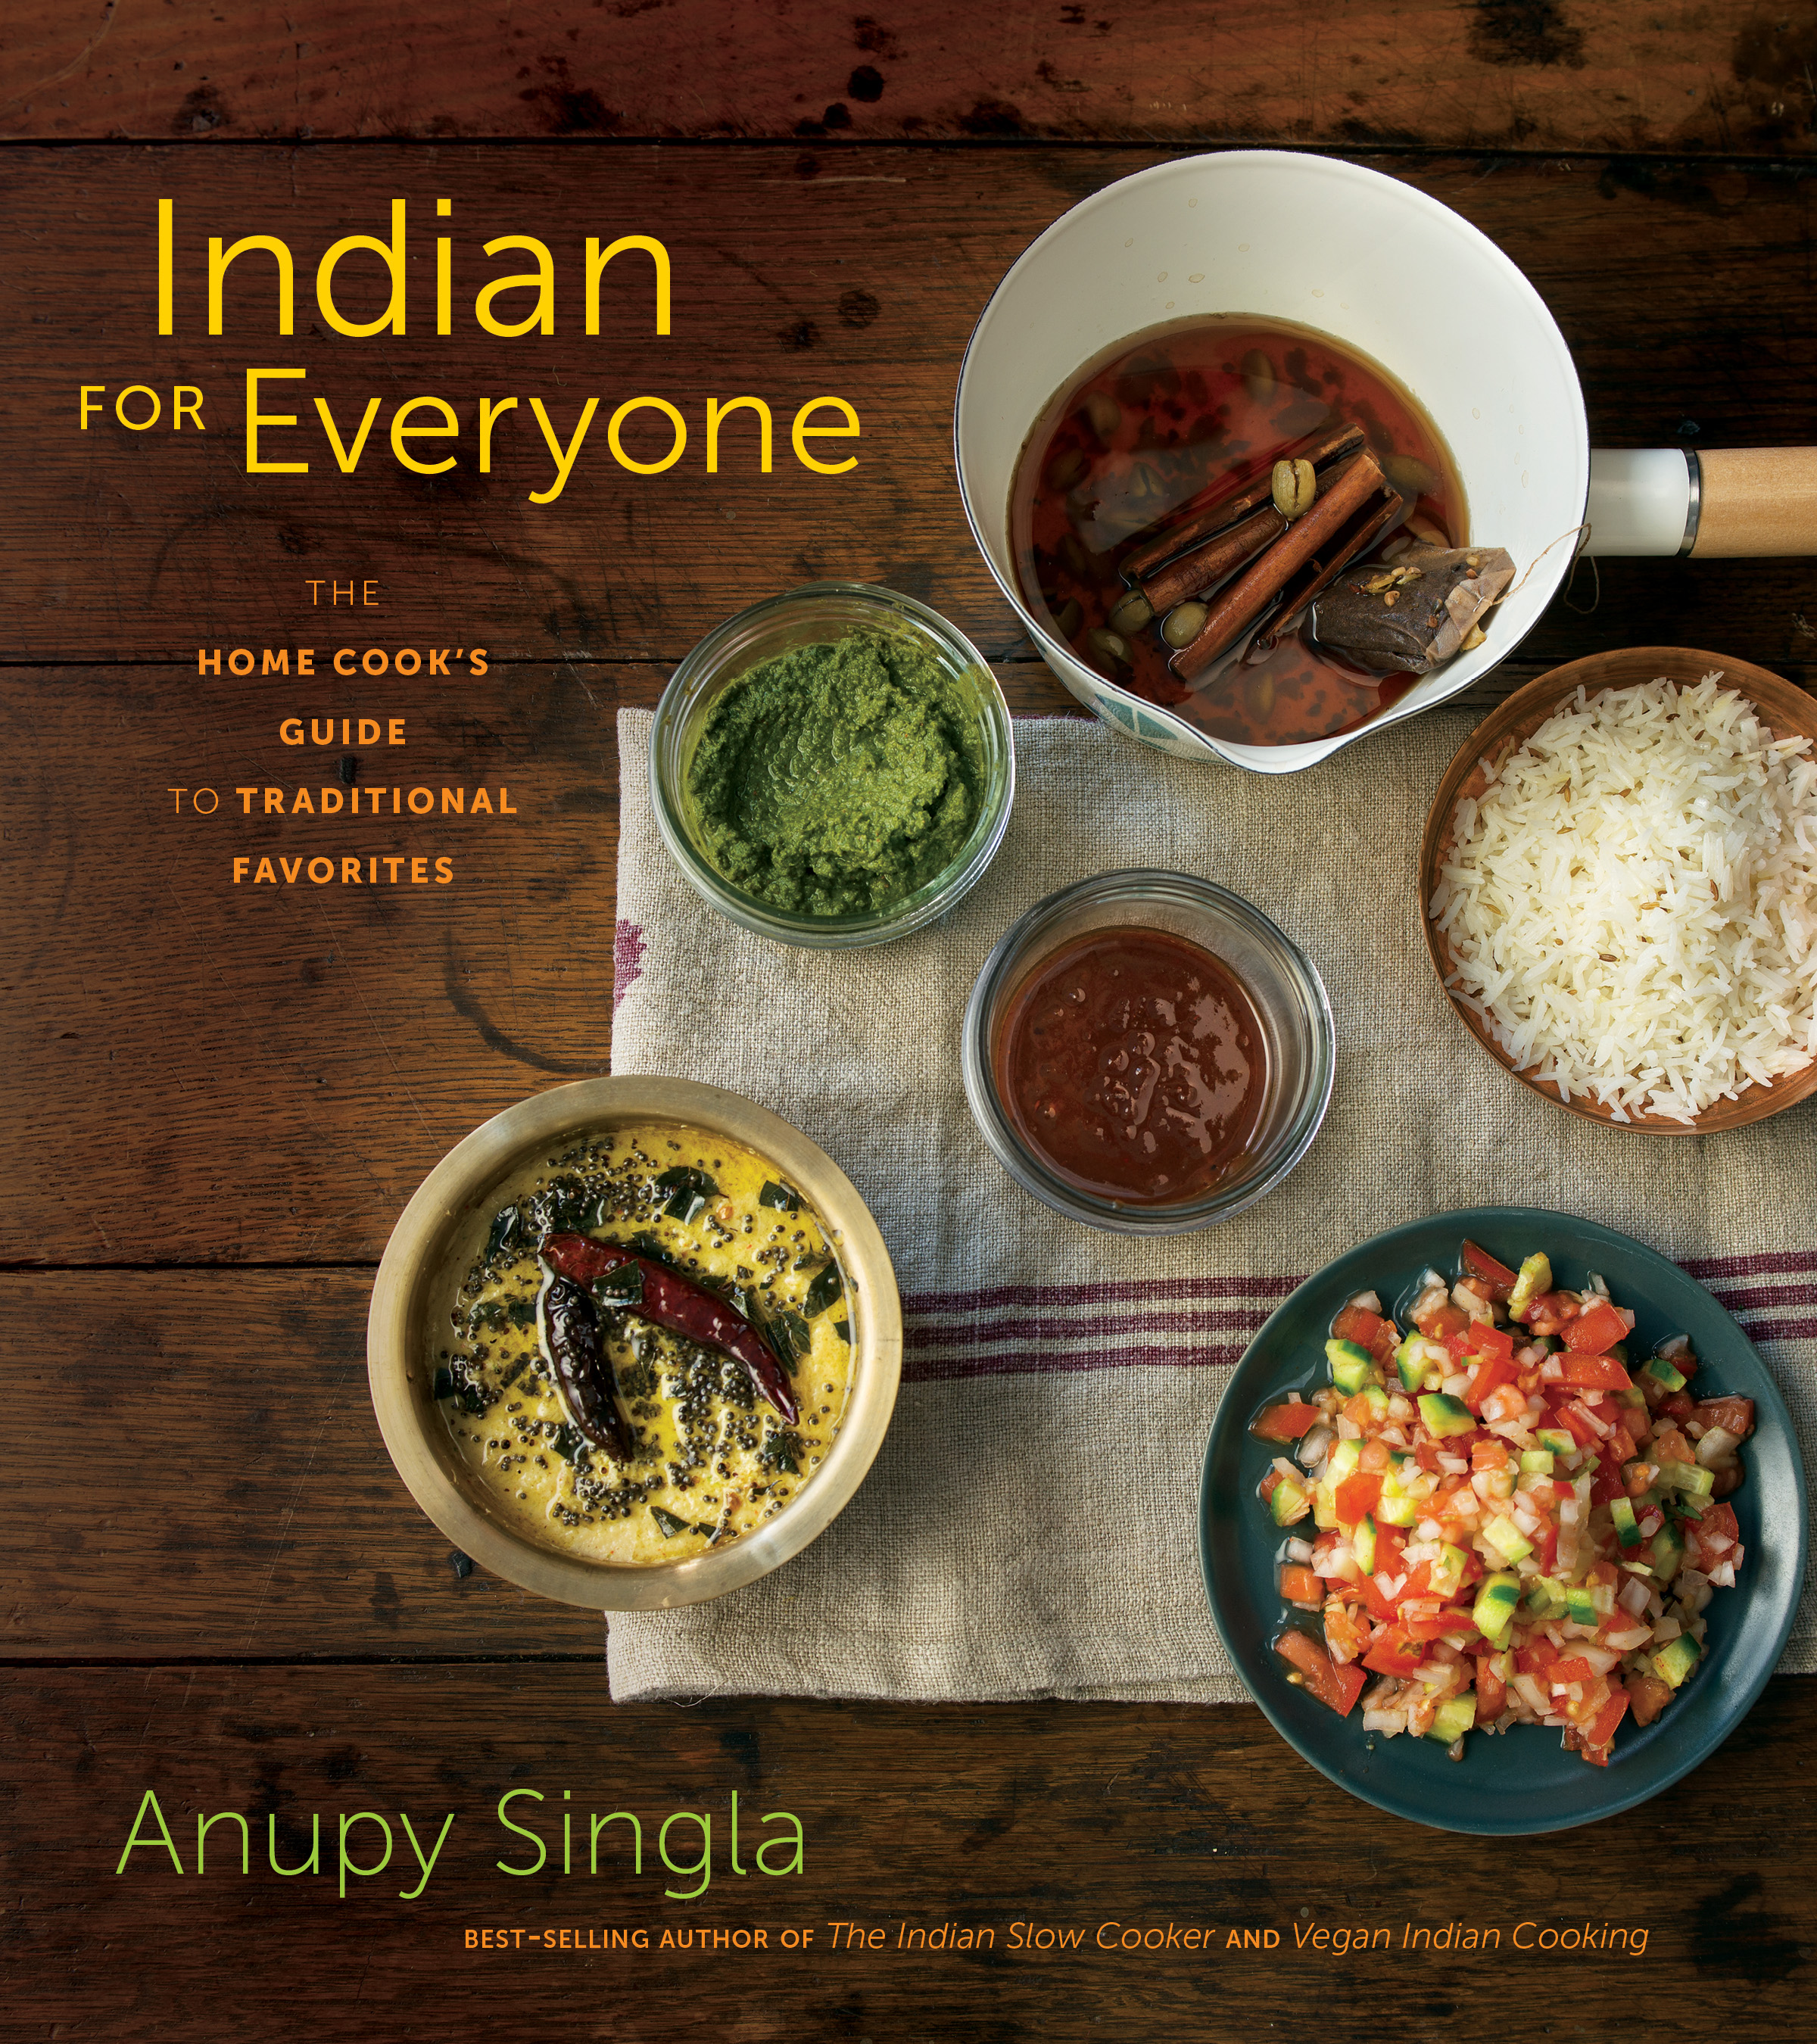 Anupy Singla is at the Book Larder tomorrow from 6:30-8 p.m. signing